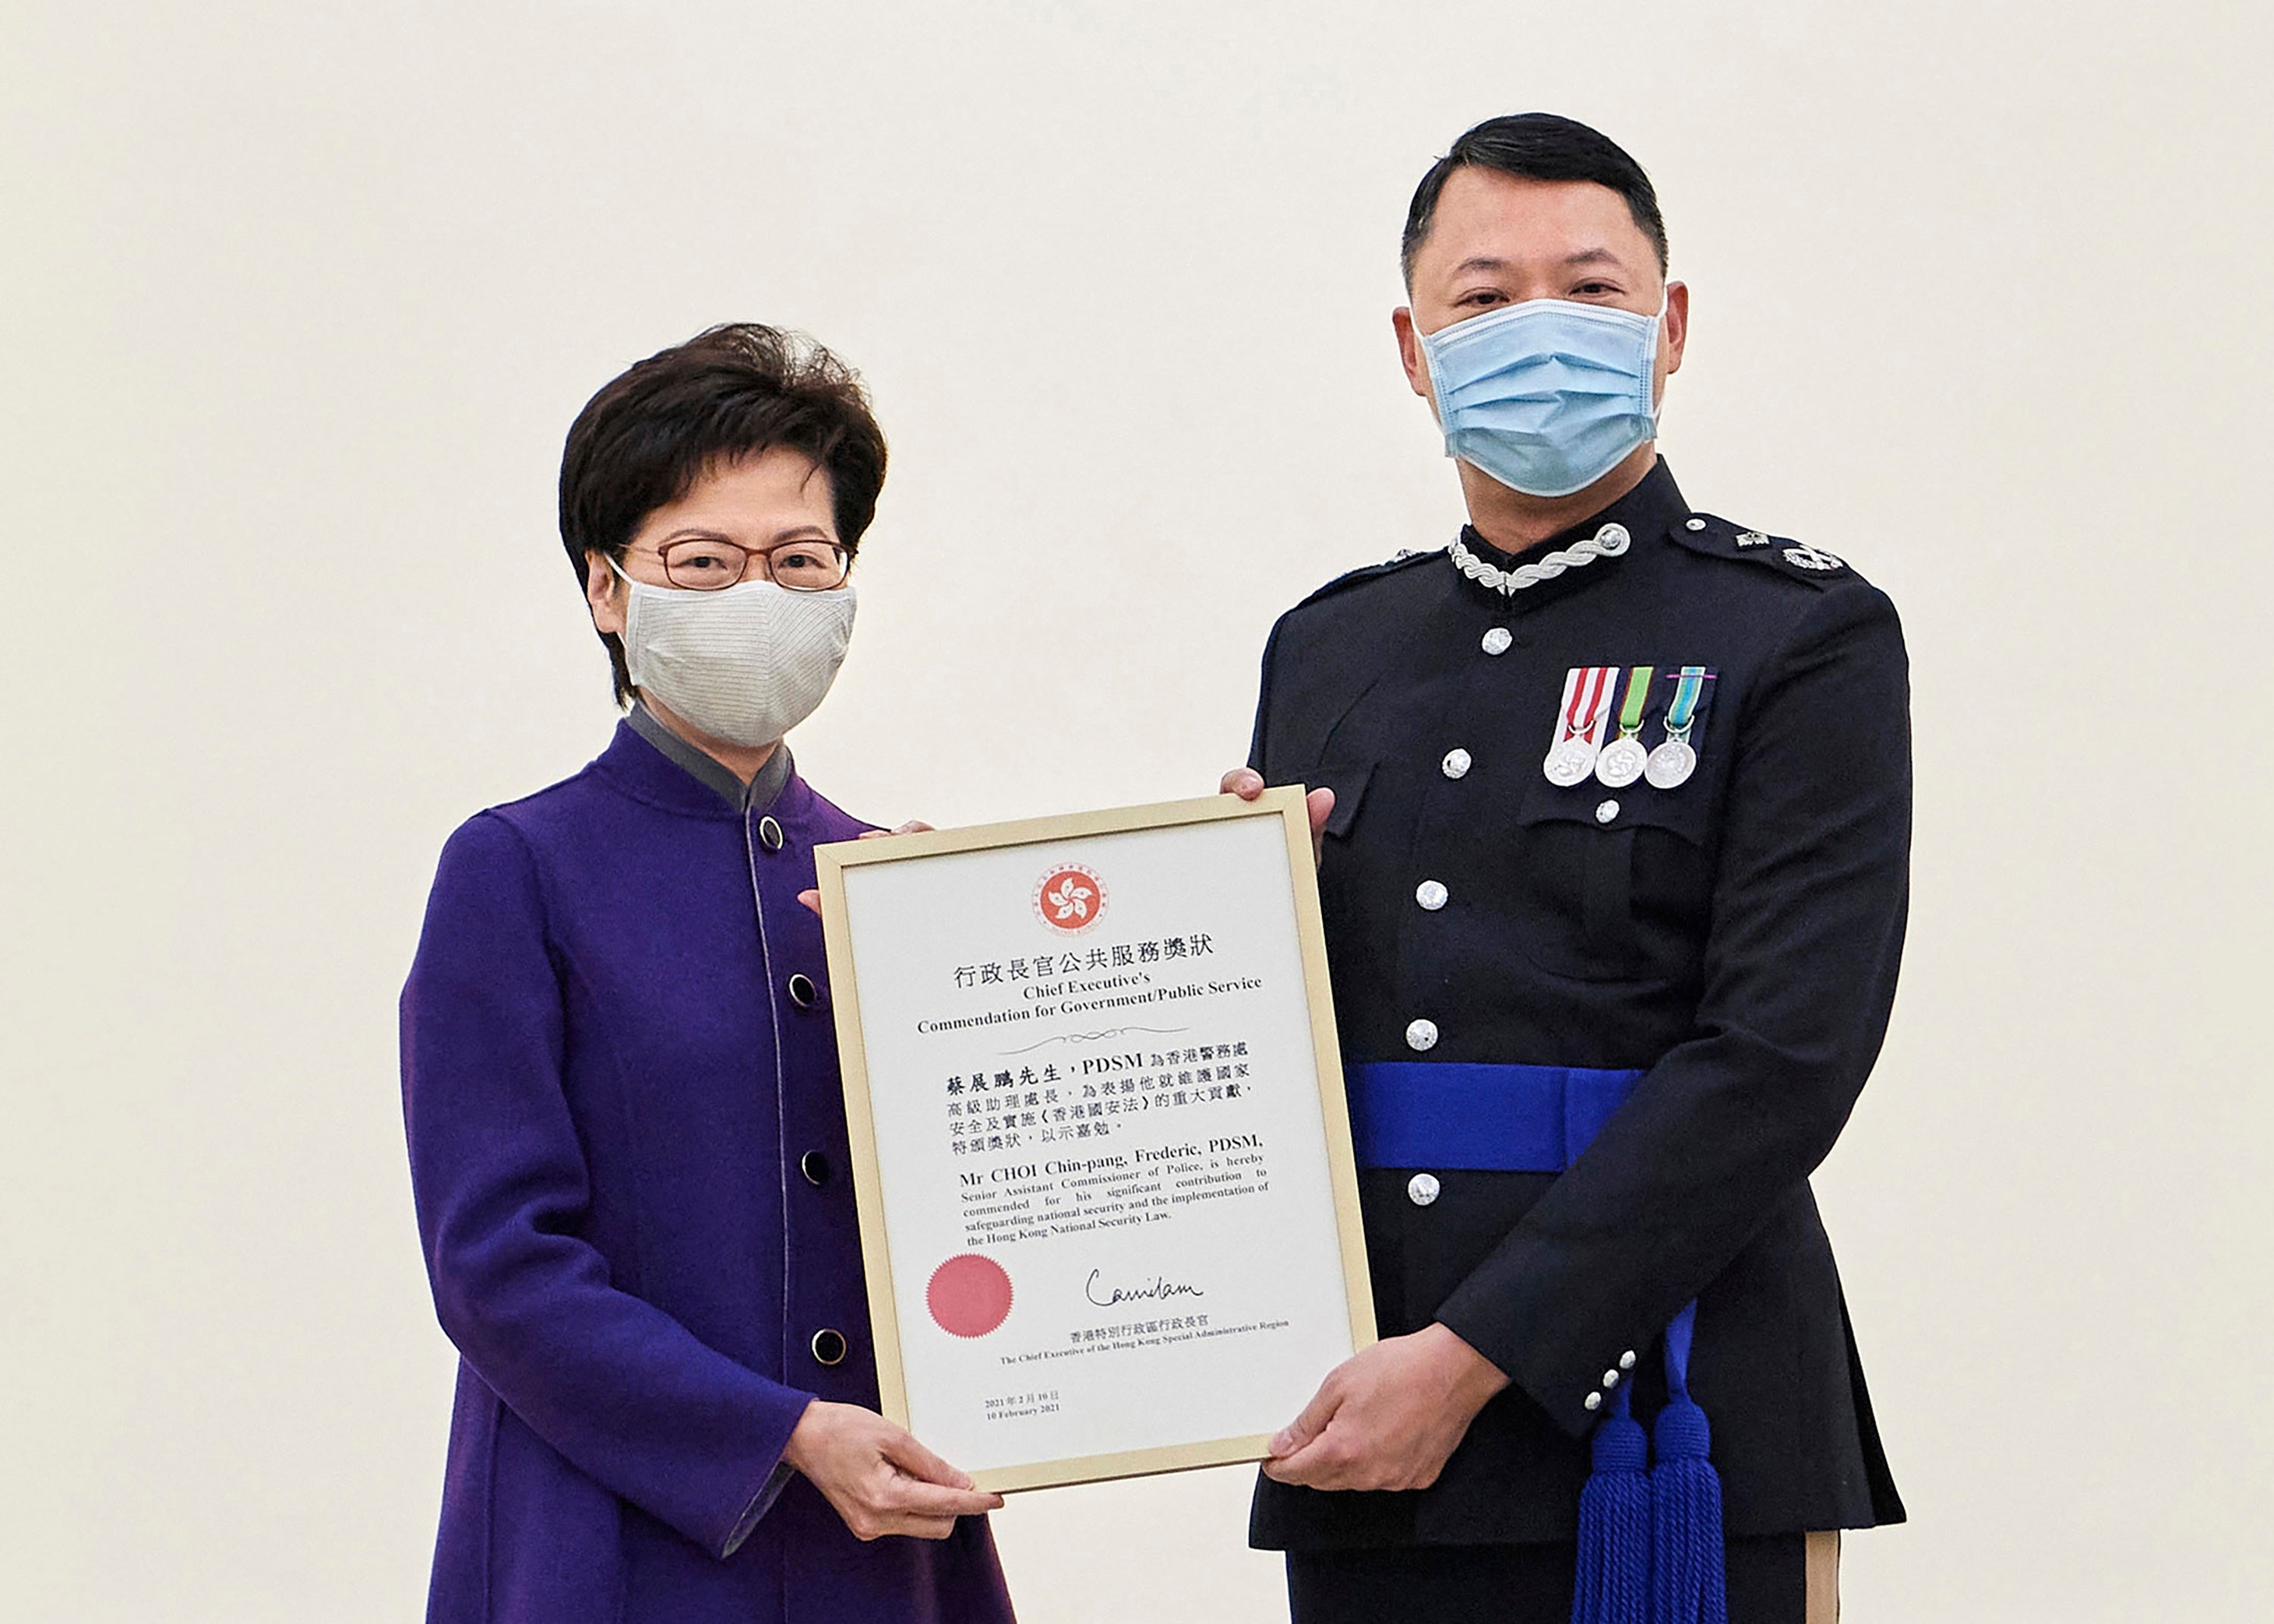 Hong Kong Chief Executive Carrie Lam, left, presents the award to Hong Kong's Director of National Security Frederic Choi